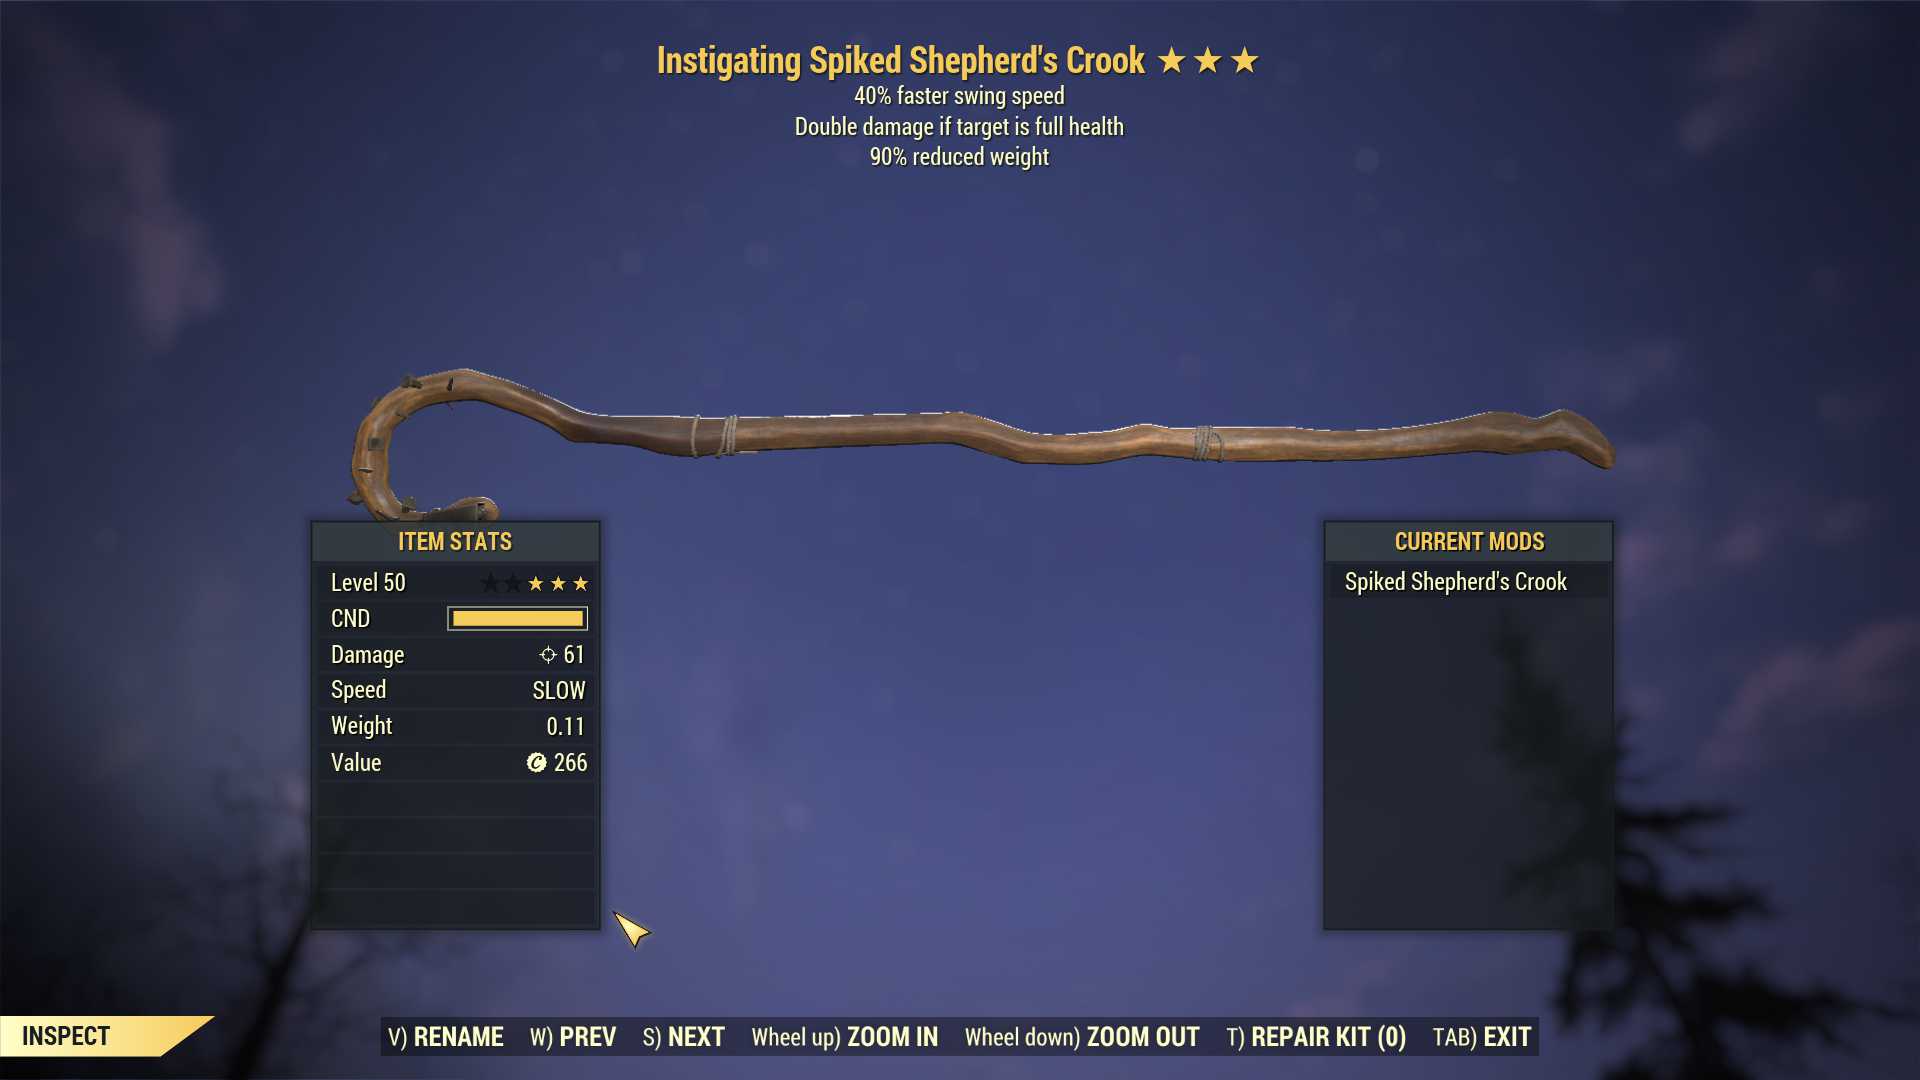 Instigating Shepherd's Crook (40% Faster Swing Speed, 90% reduced weight)